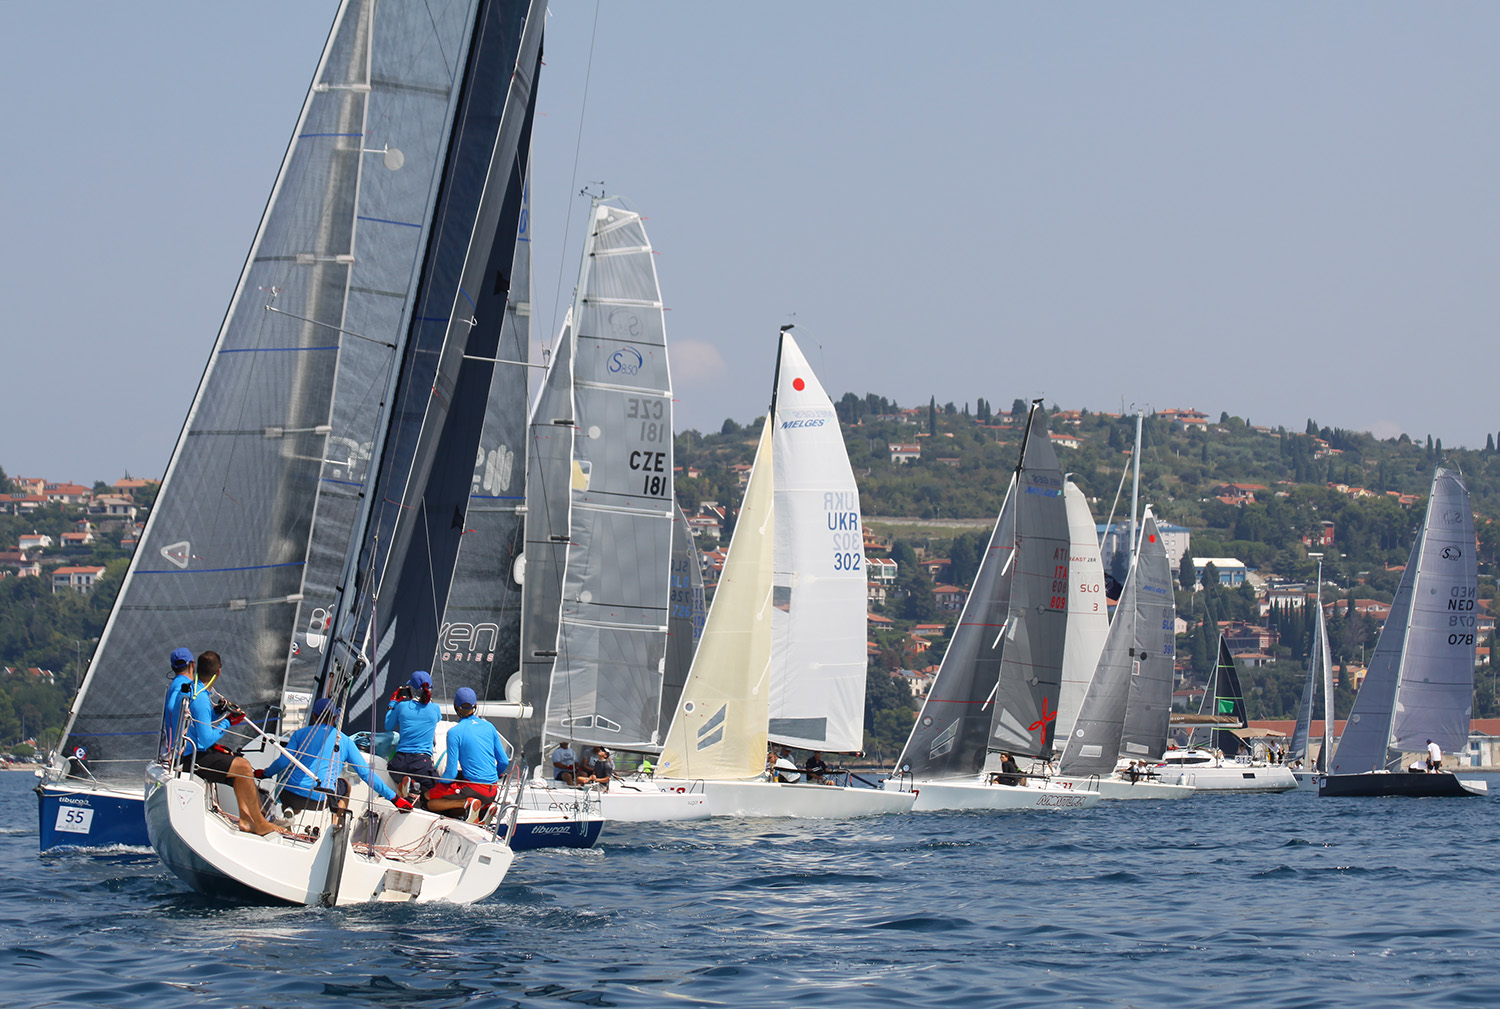 ORC Sportboats ready to race in Portoroz